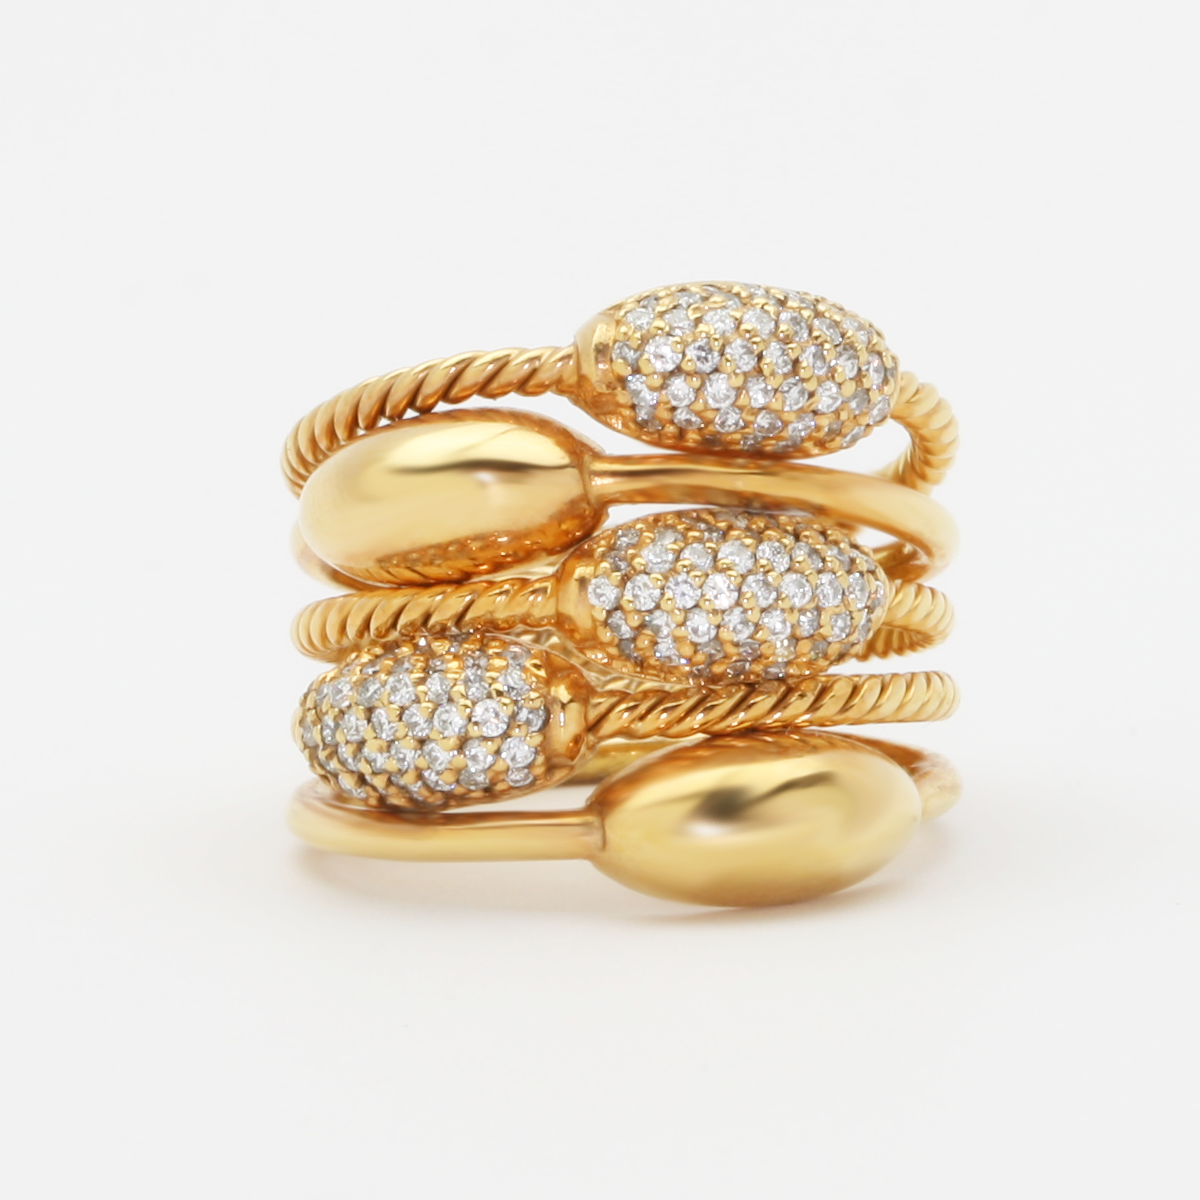 LANAE | Designer fine jewelry from the heart of Vail, Colorado